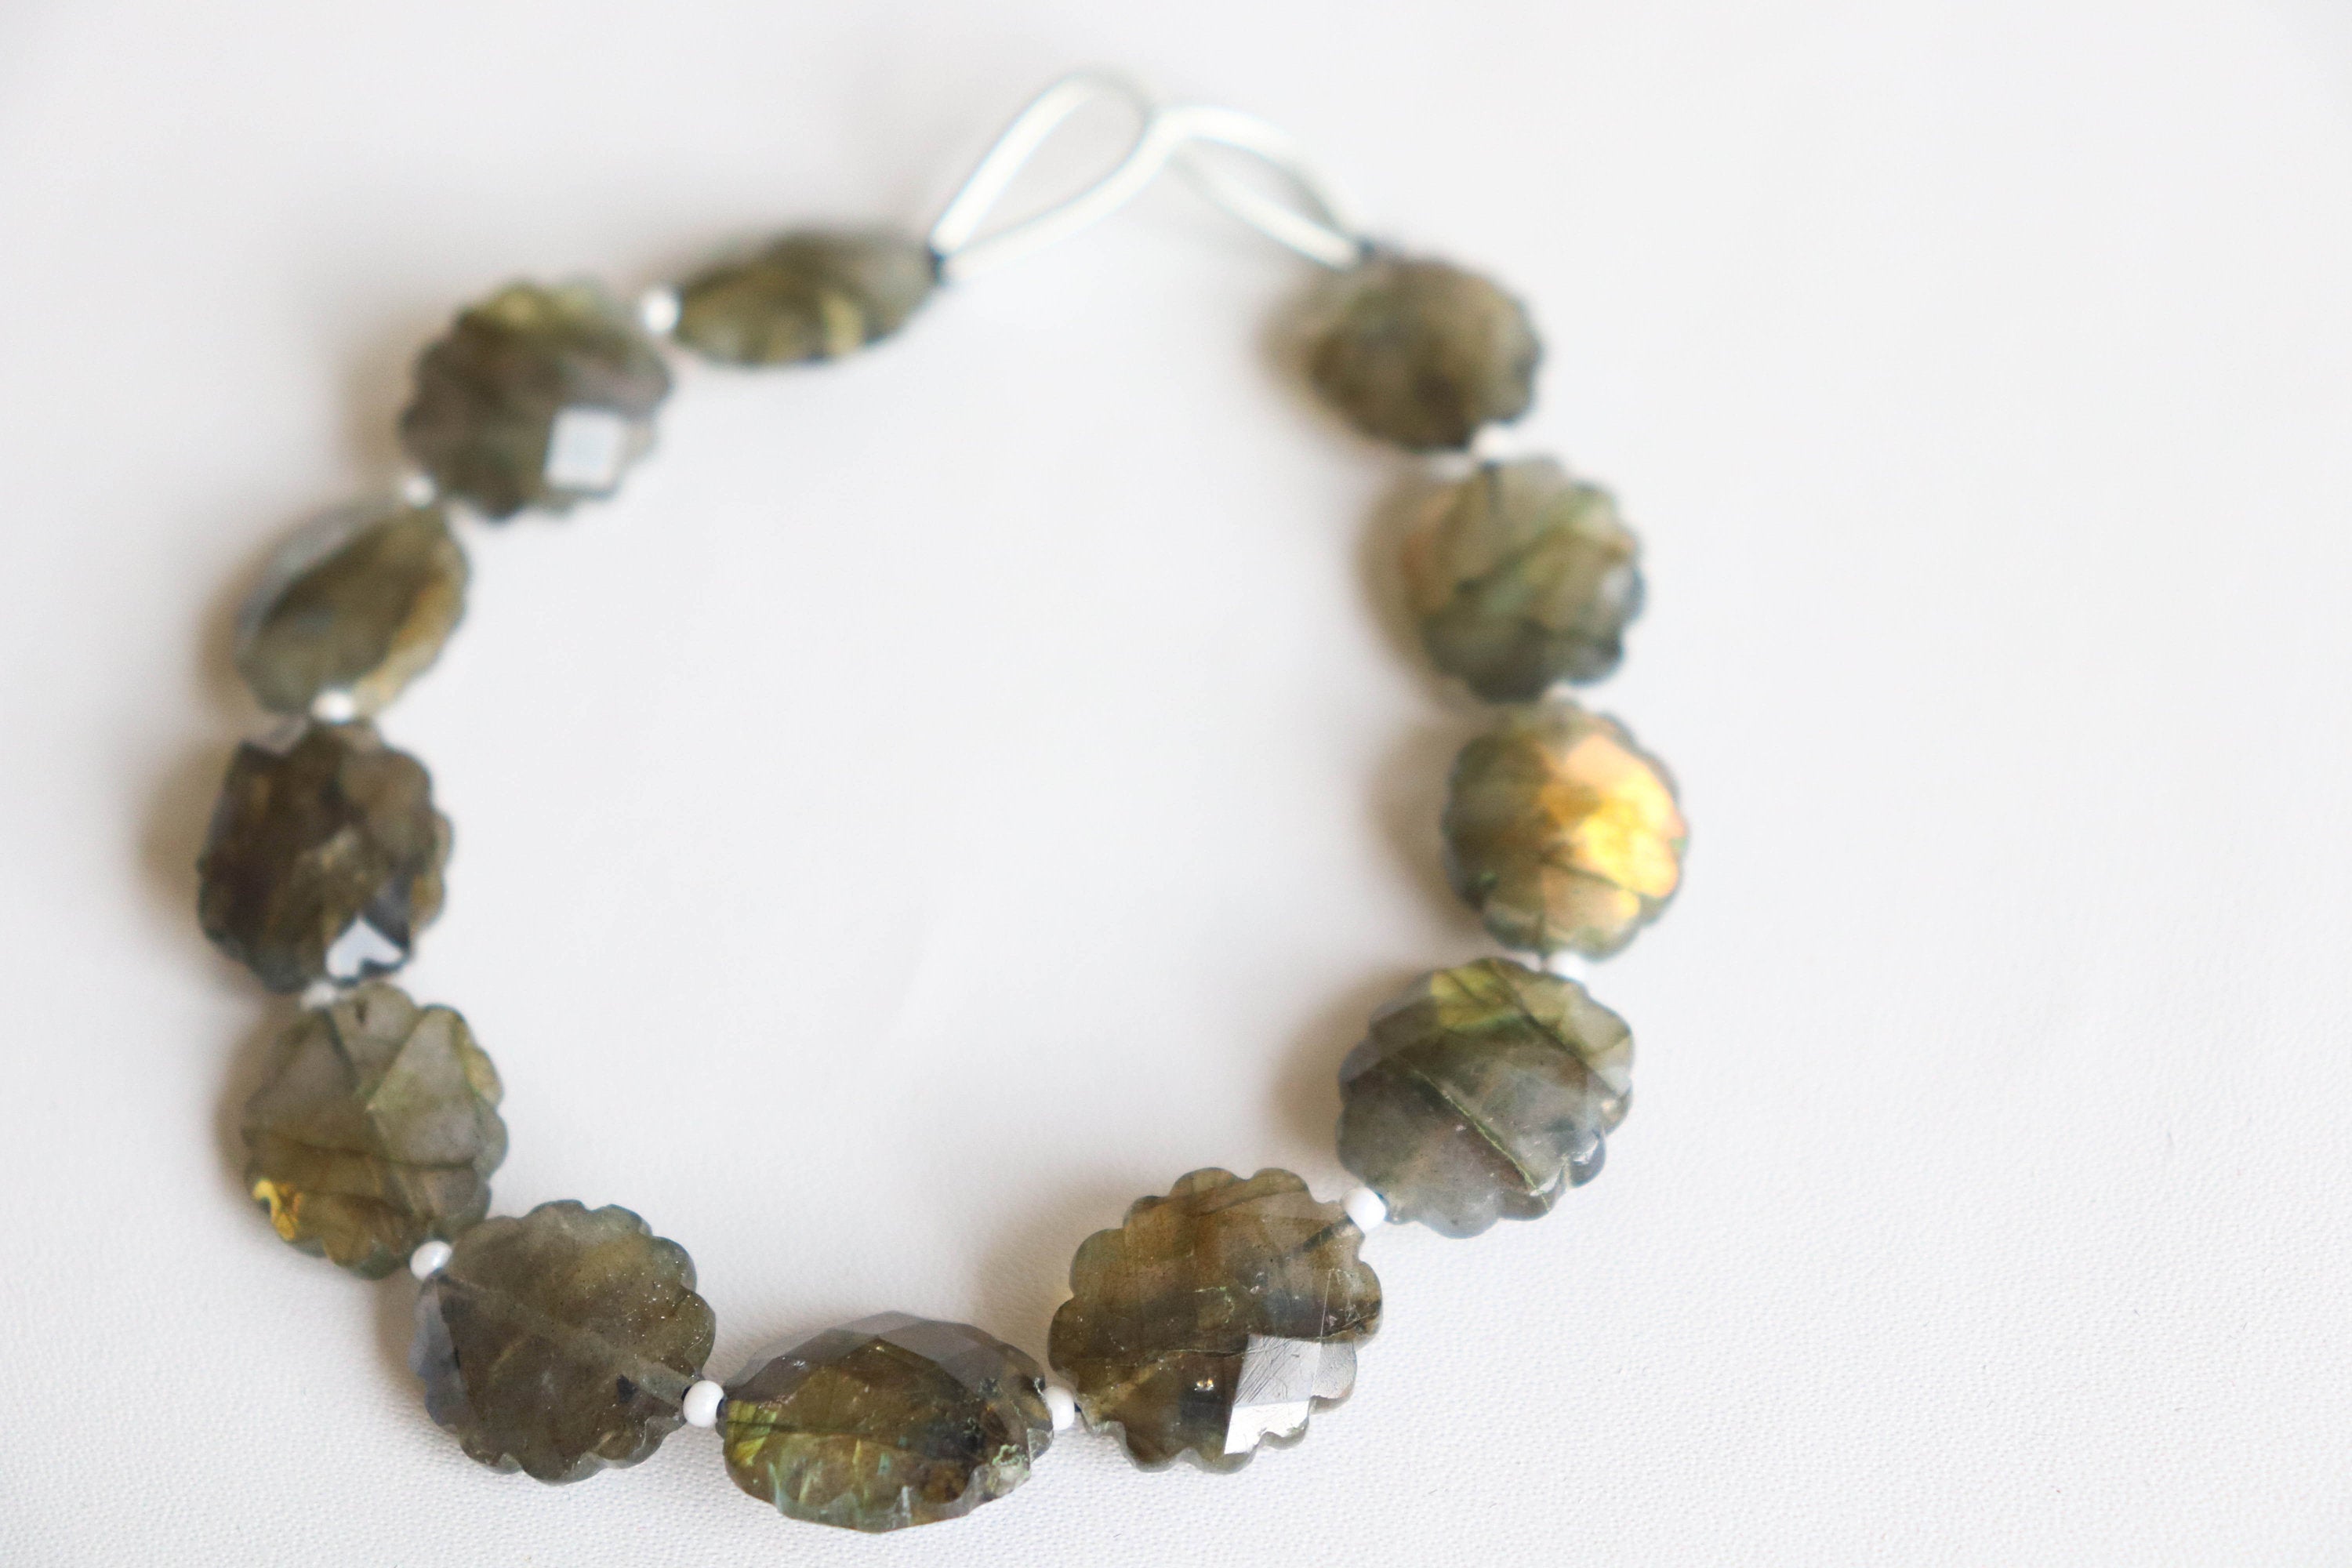 16 Pieces Flashy Labradorite Beads faceted Flower Shape | 8x10 to 12x14mm | Center drill | 10 inch Strand | Natural Gemstone Beads Beadsforyourjewelry